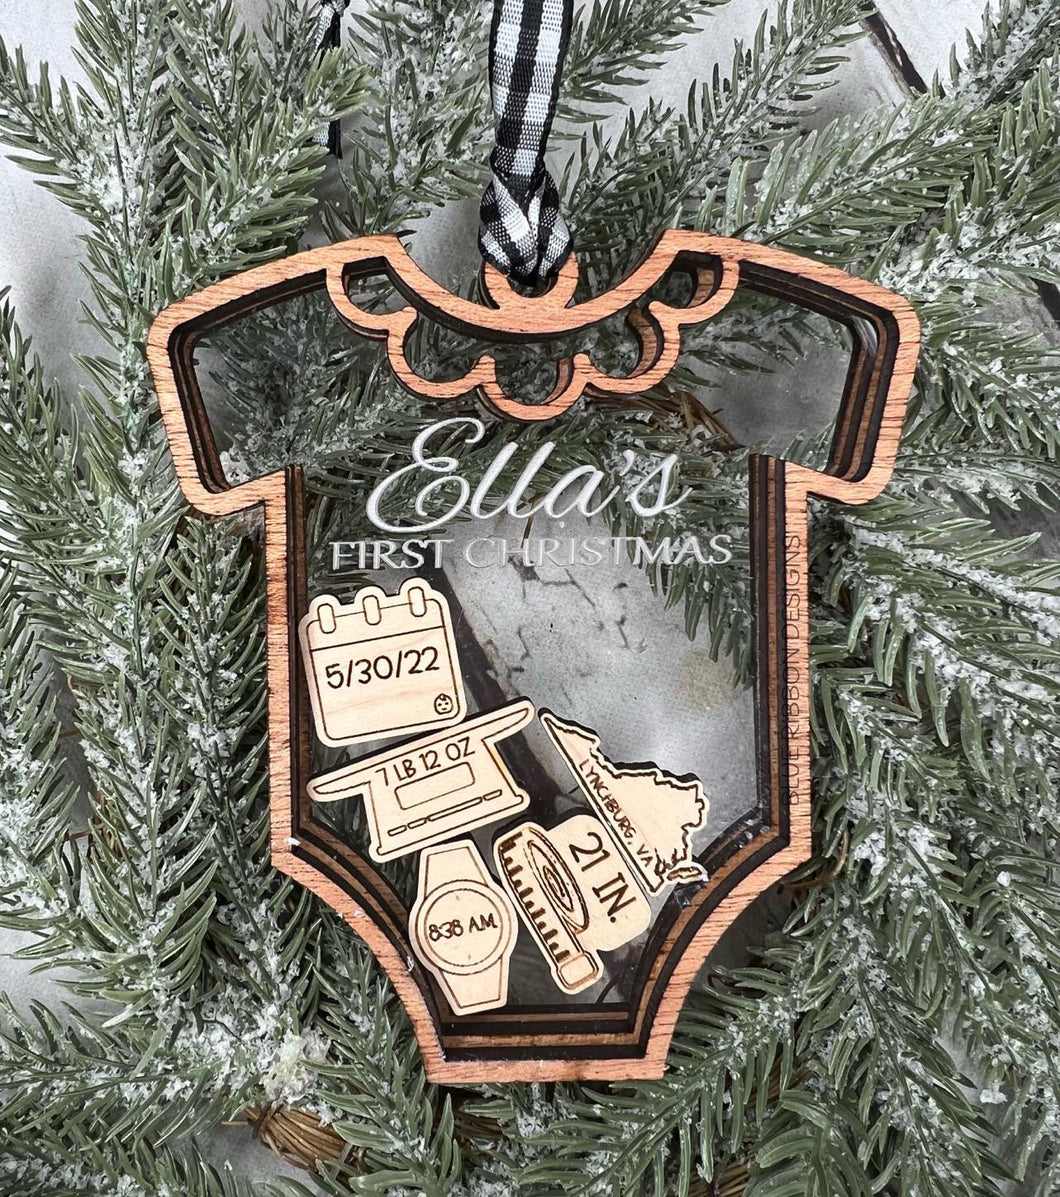 Personalized Baby's First Christmas Bodysuit Ornament